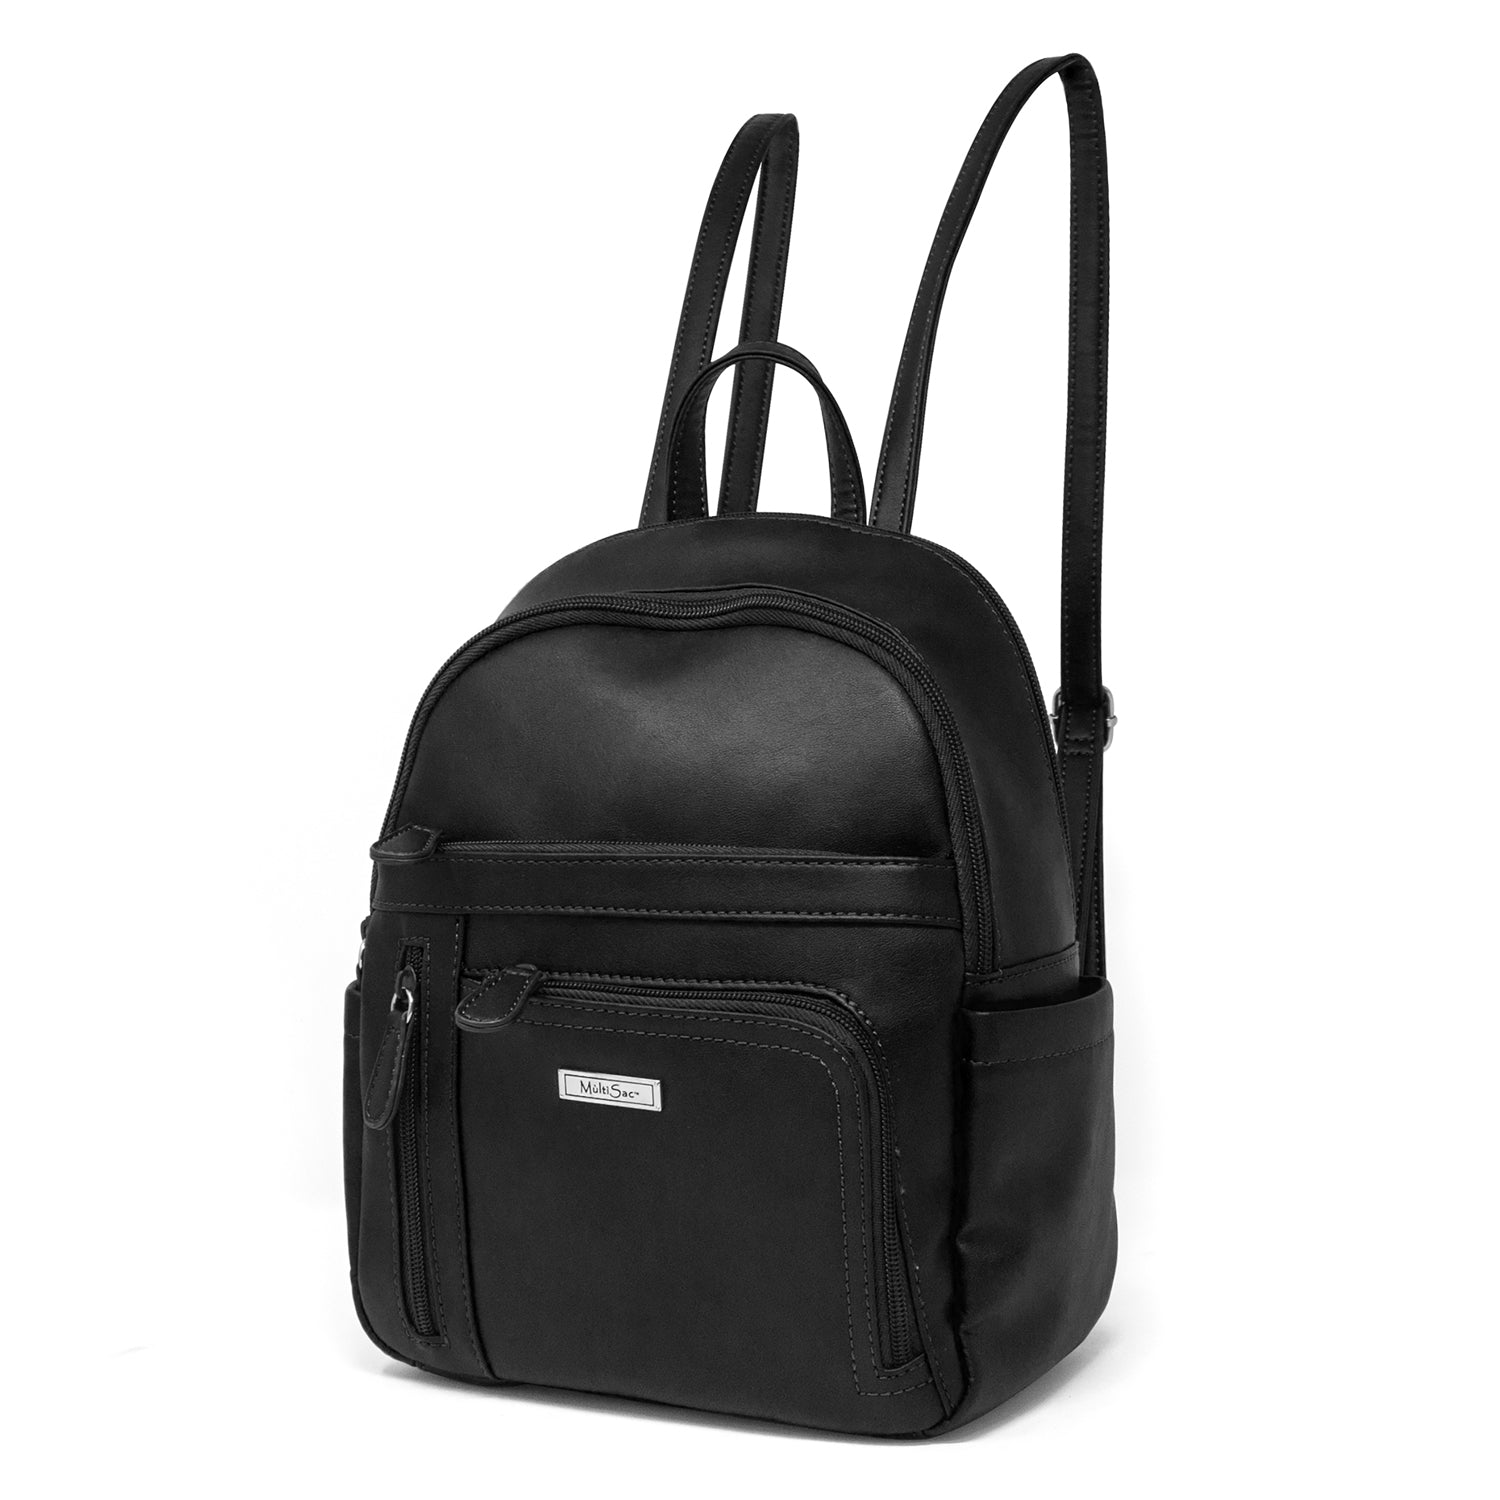 MultiSac Black Major Backpack, Best Price and Reviews